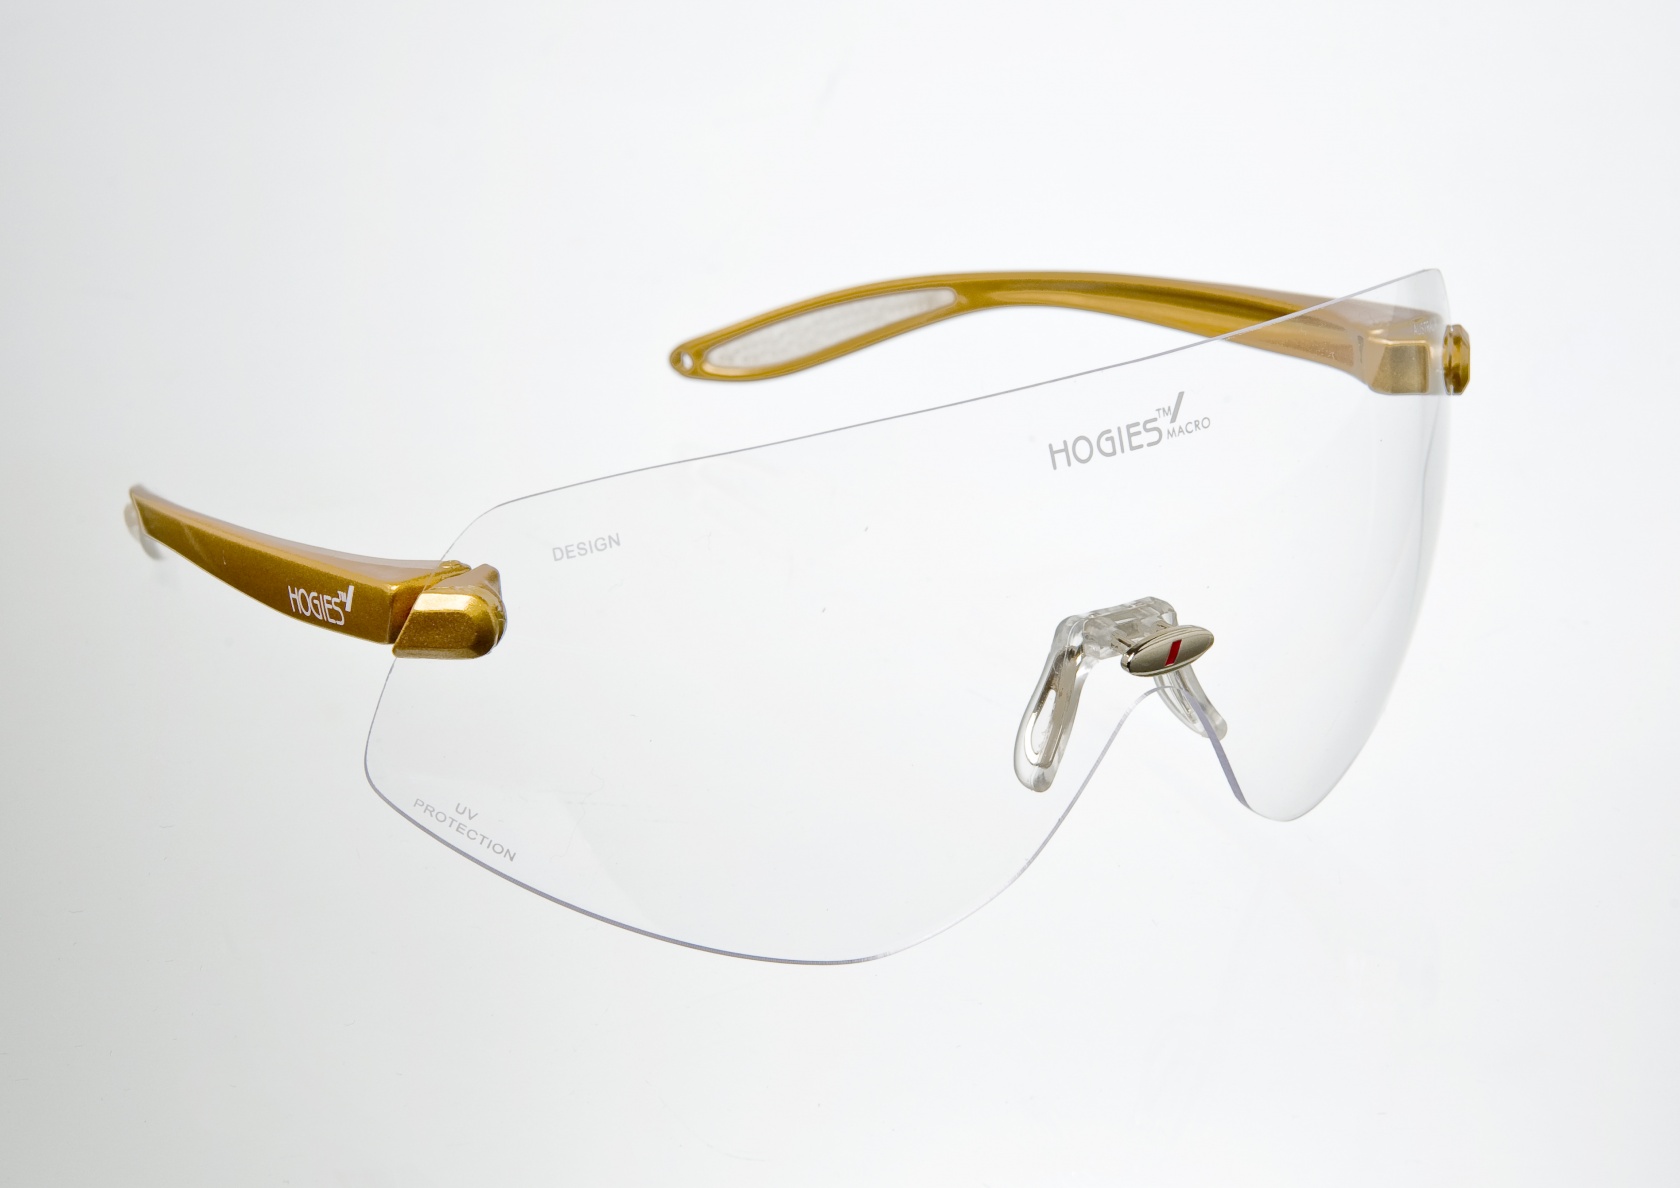 Glasses Hogies Eyeguard Clear Lens Gold arms image 0